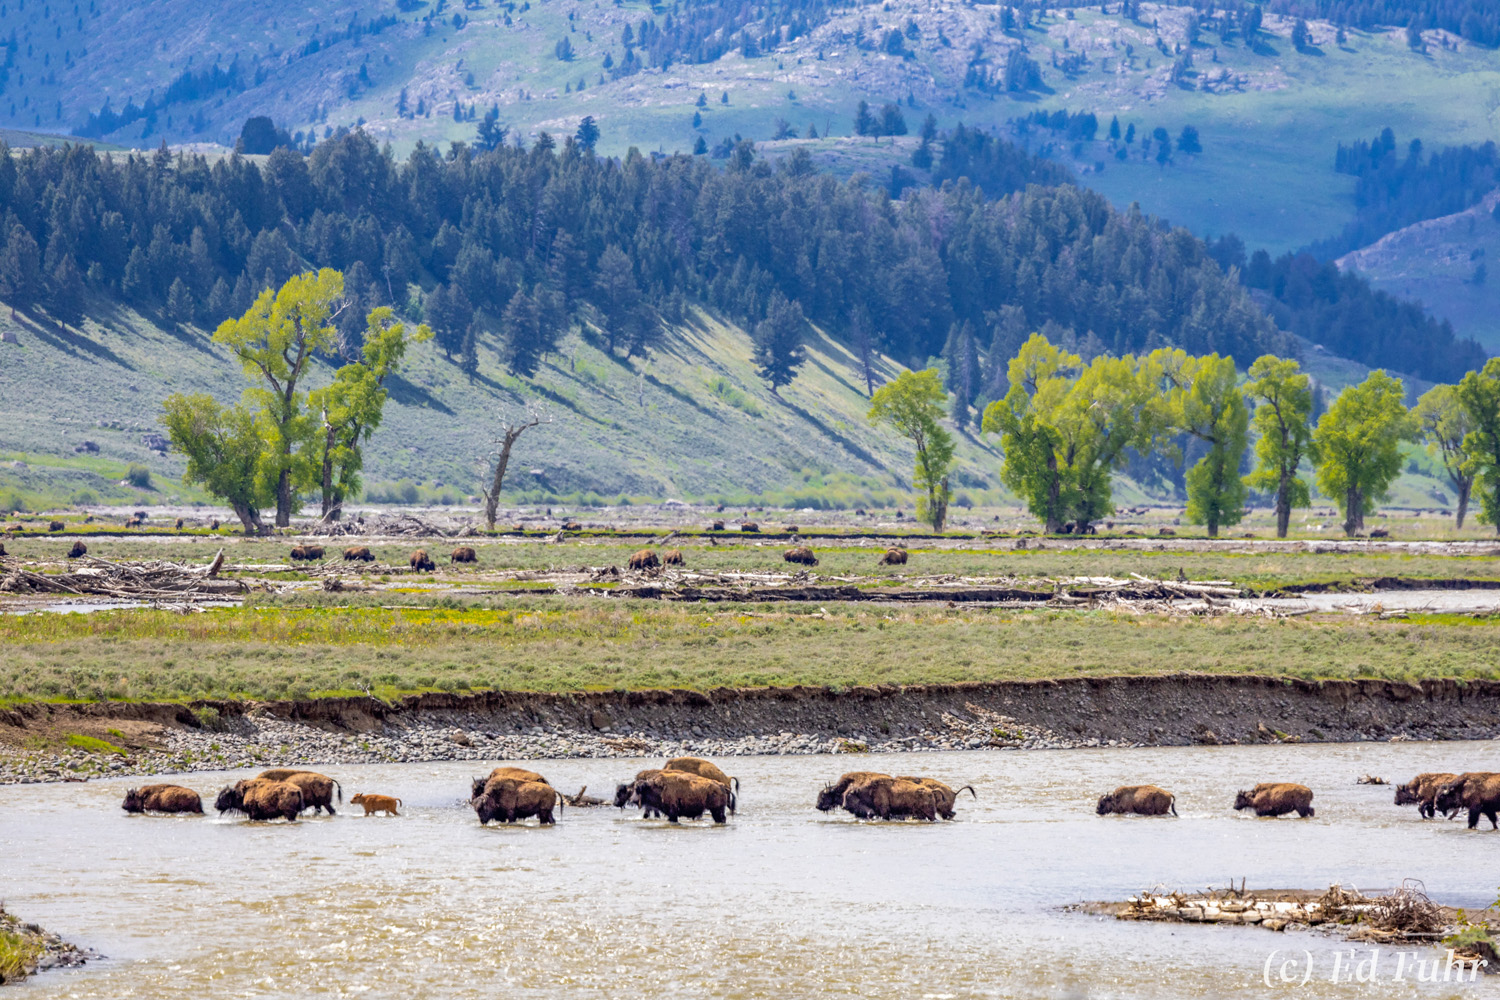 A herd of bison cross a channel as they head for greener meadows.   As summer nears, they will move higher to cooler ground.